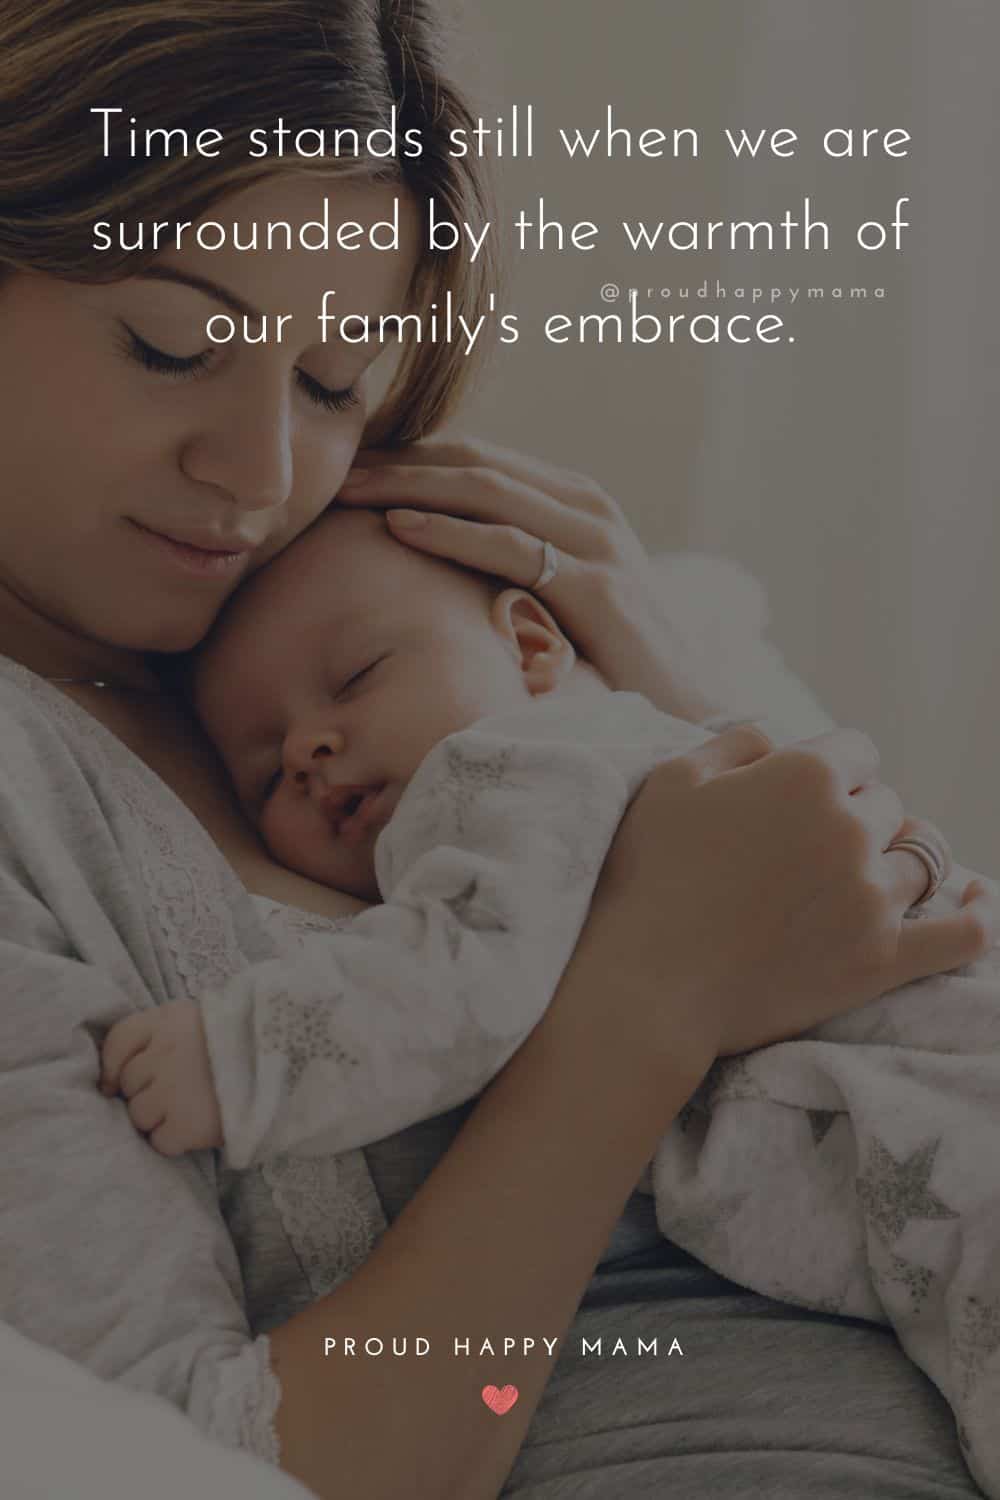 time with family quotes - Time stands still when we are surrounded by the warmth of our family's embrace.